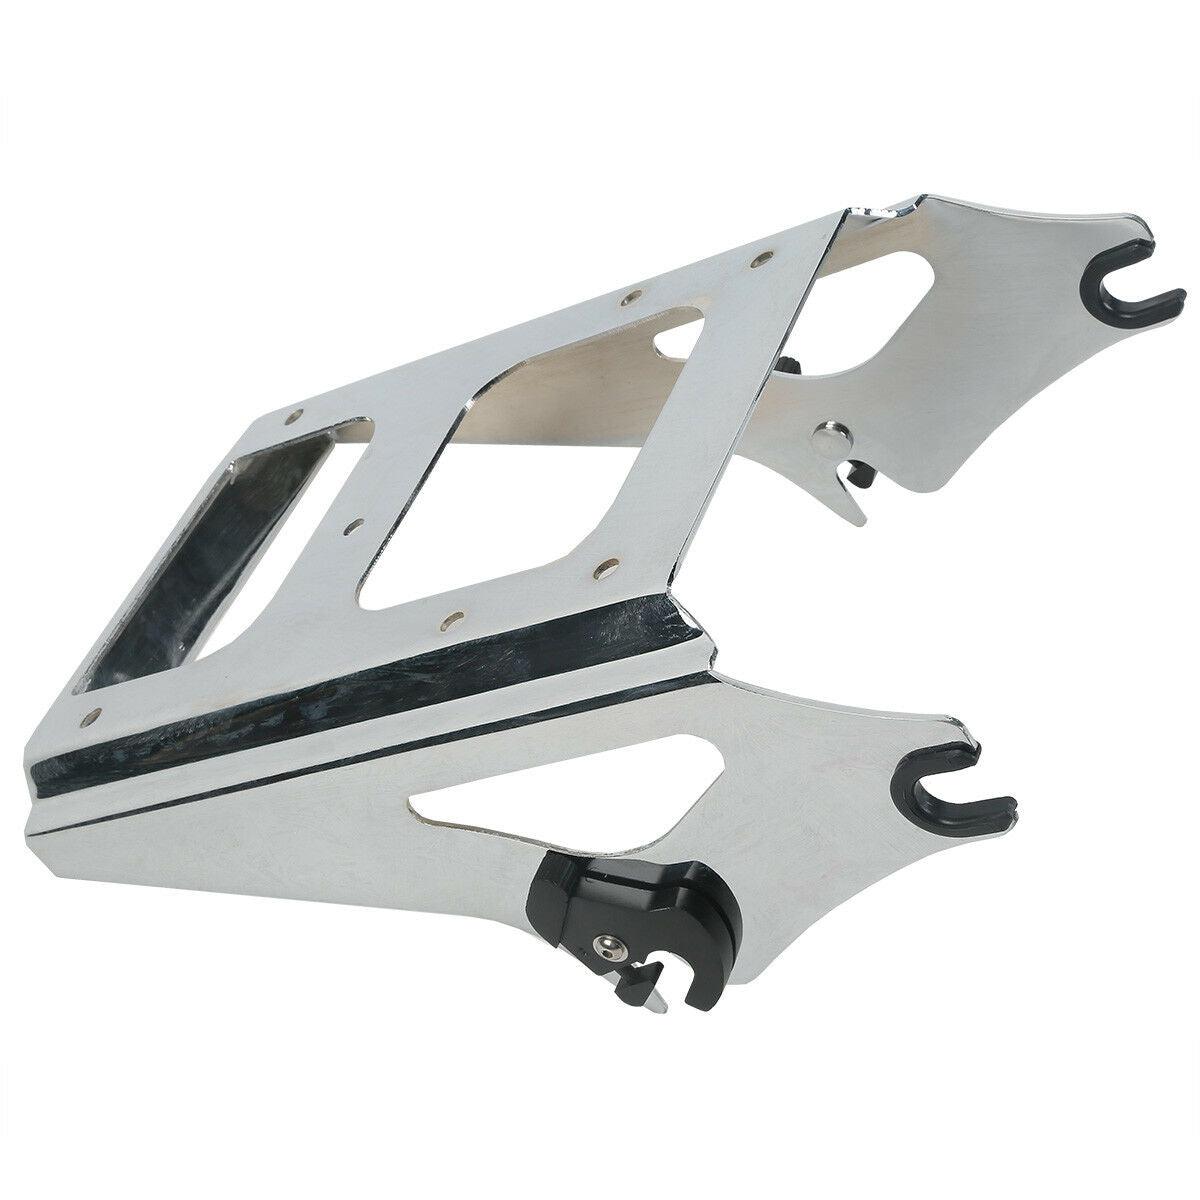 Detachable 2-Up Mount Luggage Rack Fit For Harley TourPak Street Glide 09-13 11 - Moto Life Products